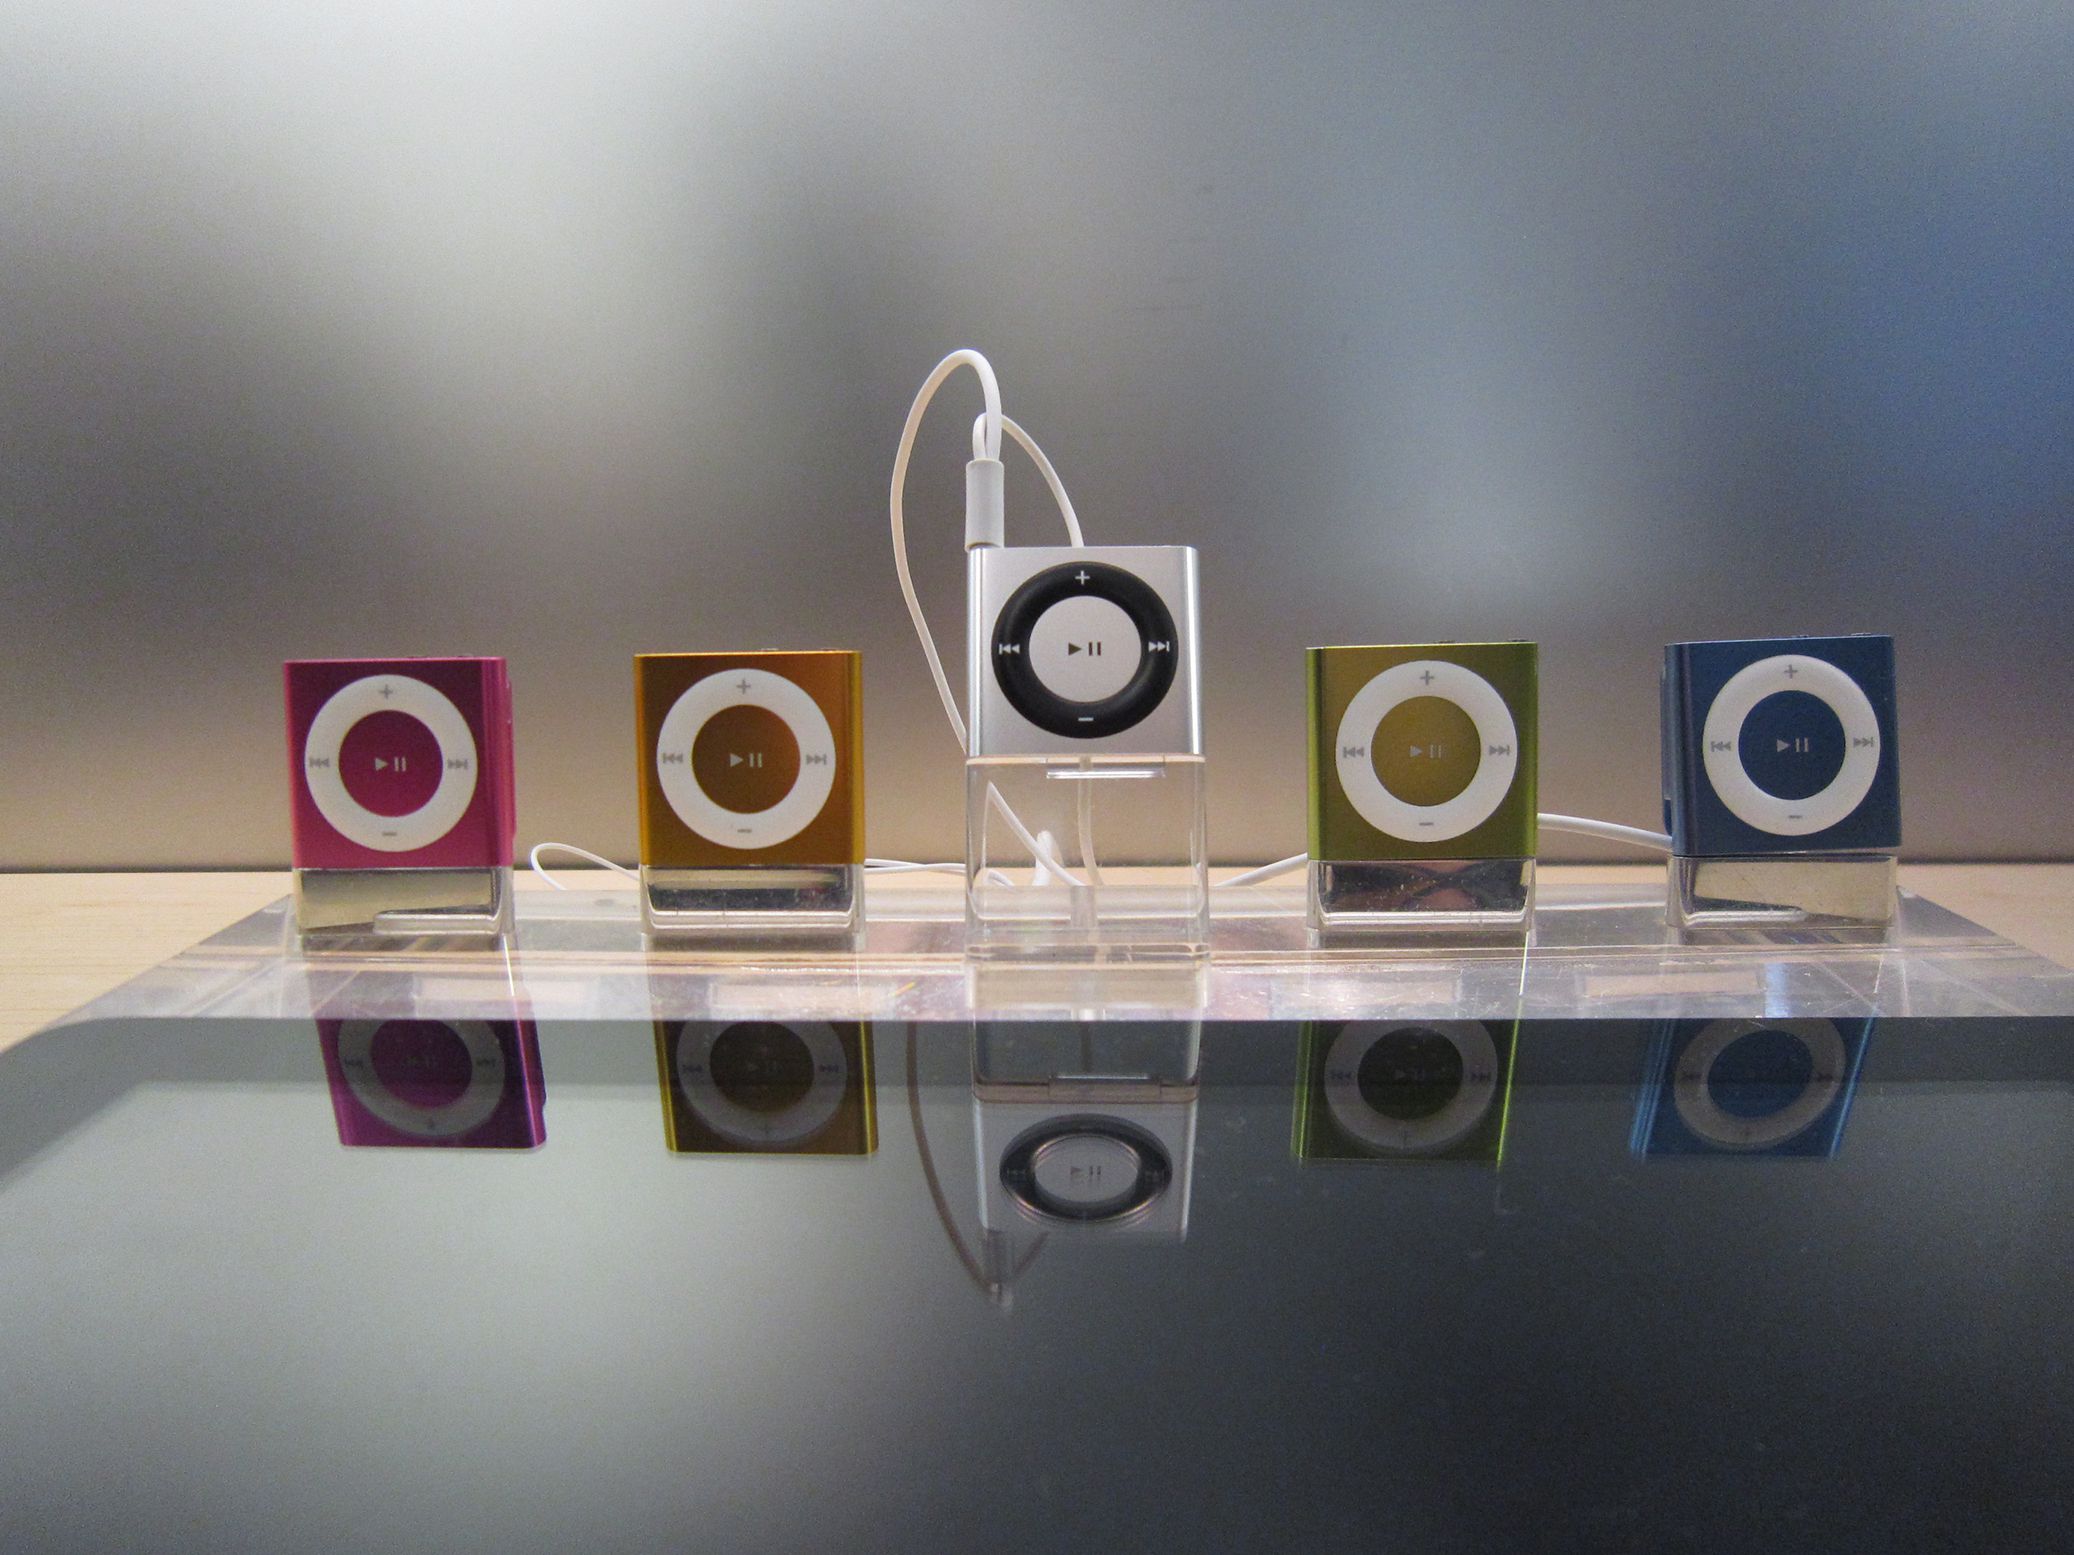 IPod Shuffle: Everything You Need To Know